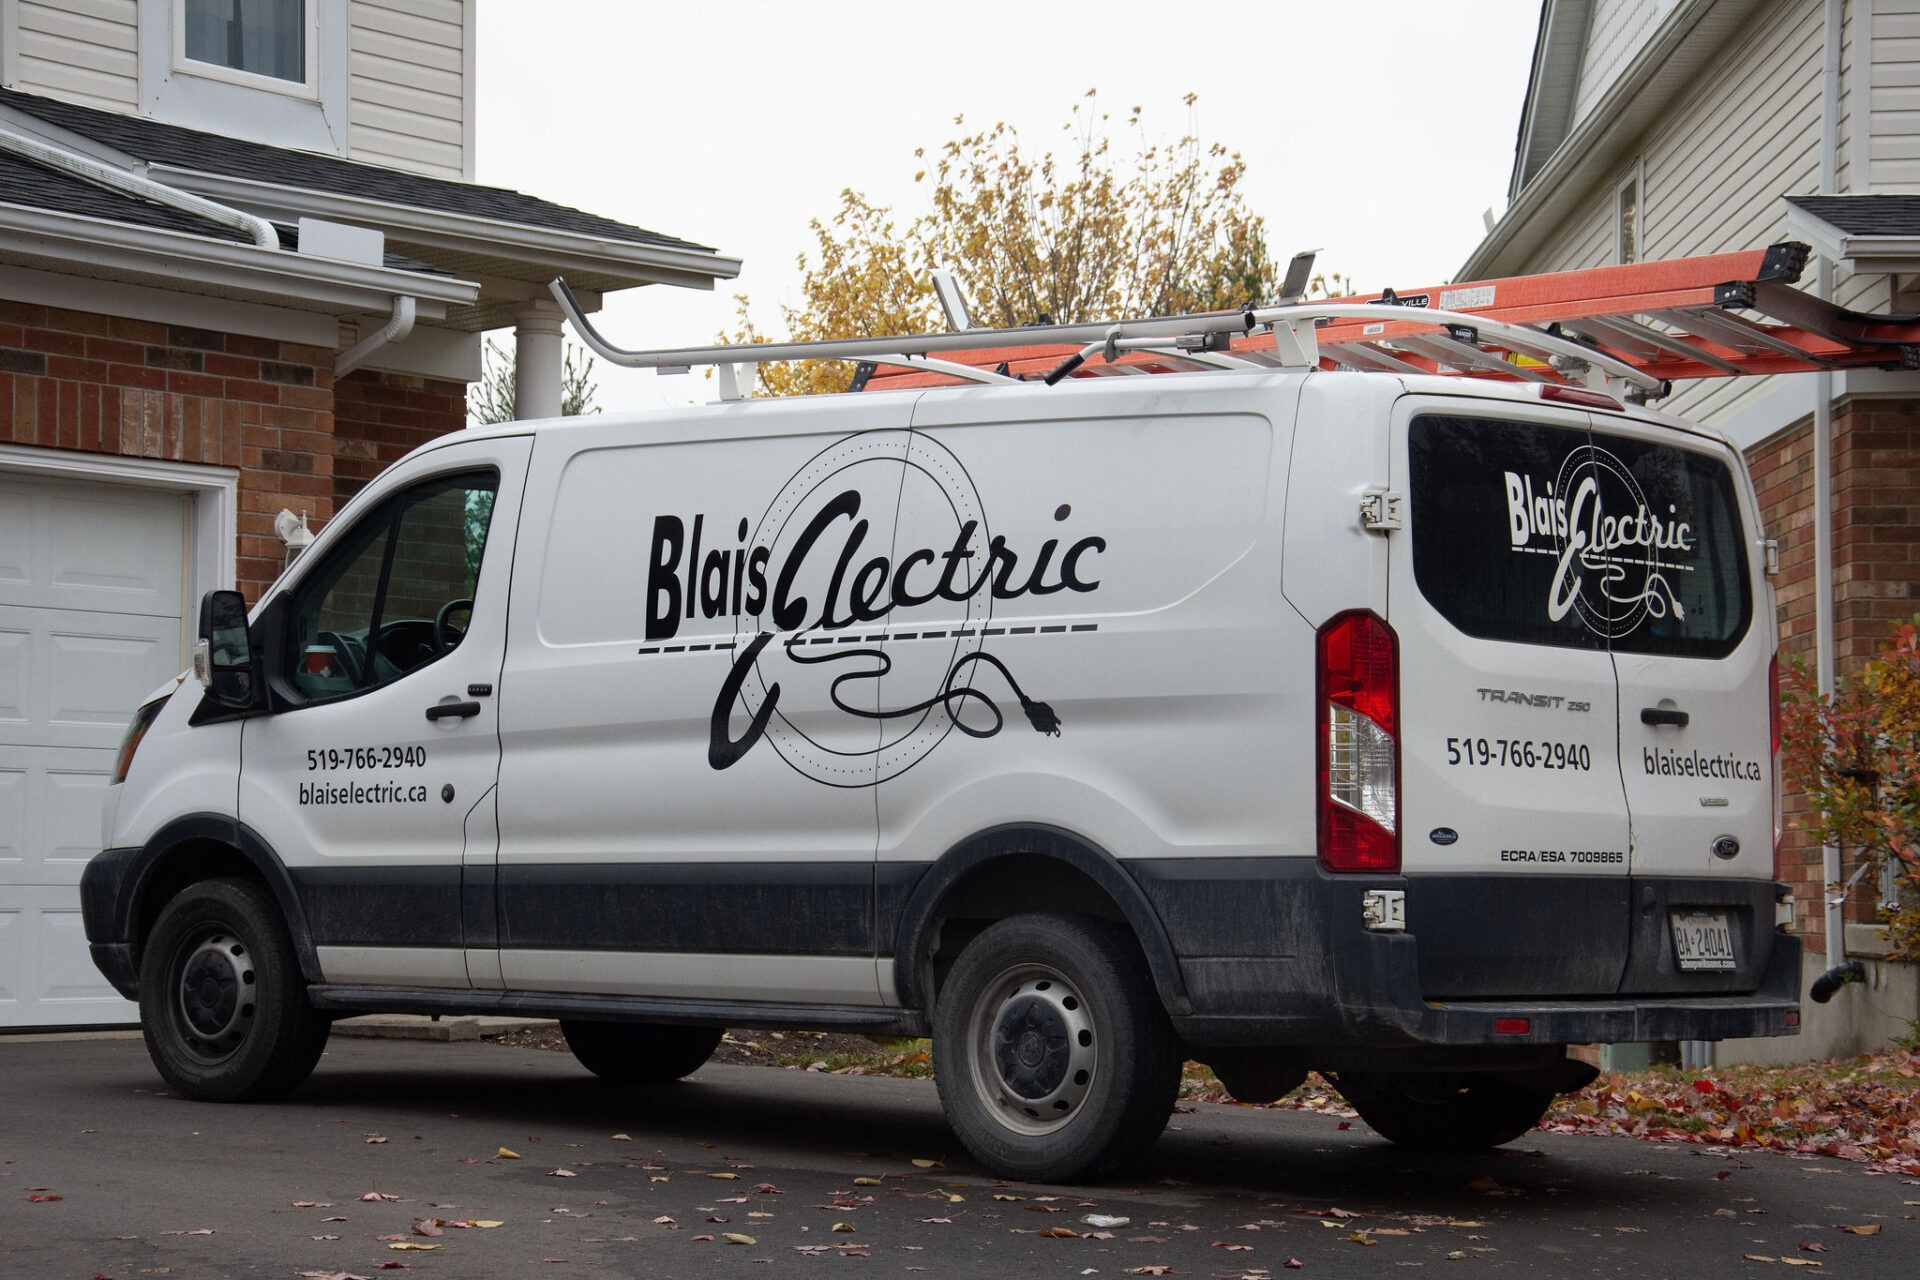 A white commercial van with "Blais Electric" branding parked in a driveway, featuring ladders mounted on top and contact information on the side.